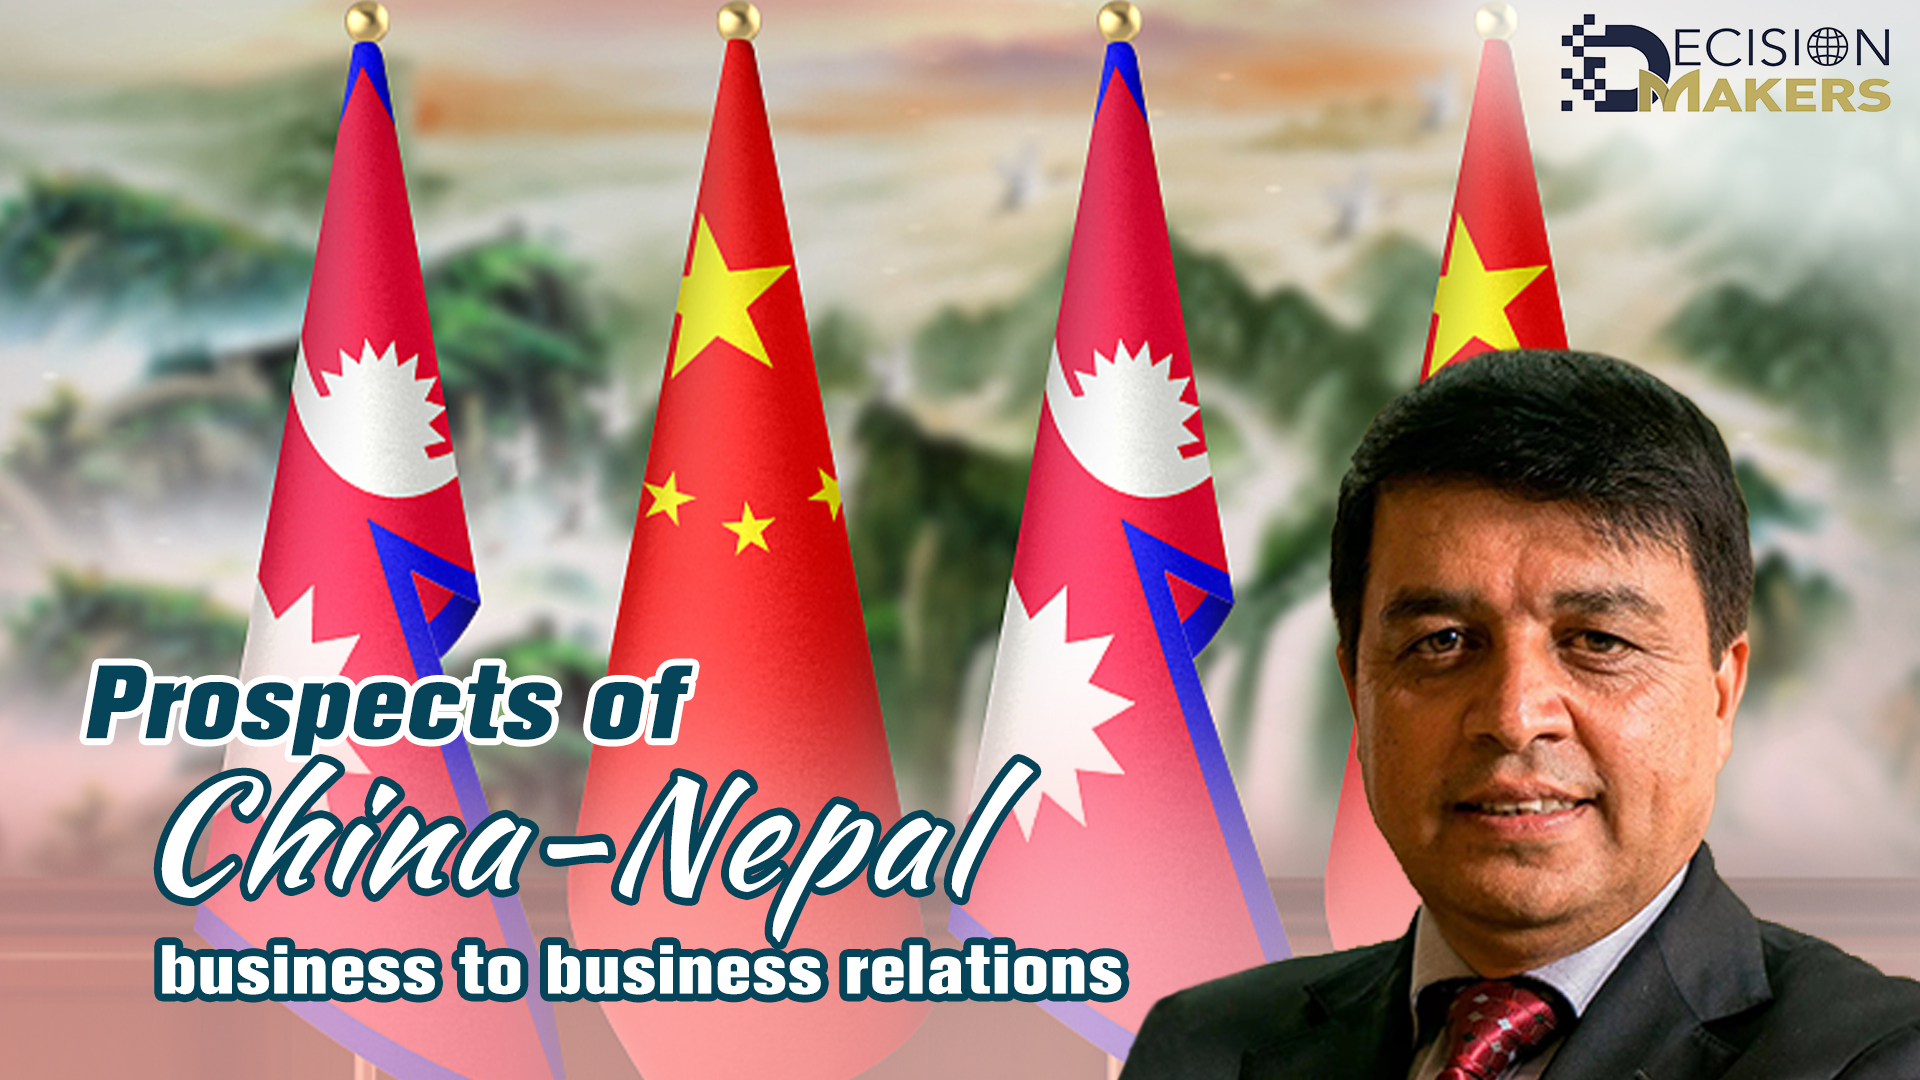 Prospects of China-Nepal business to business relations